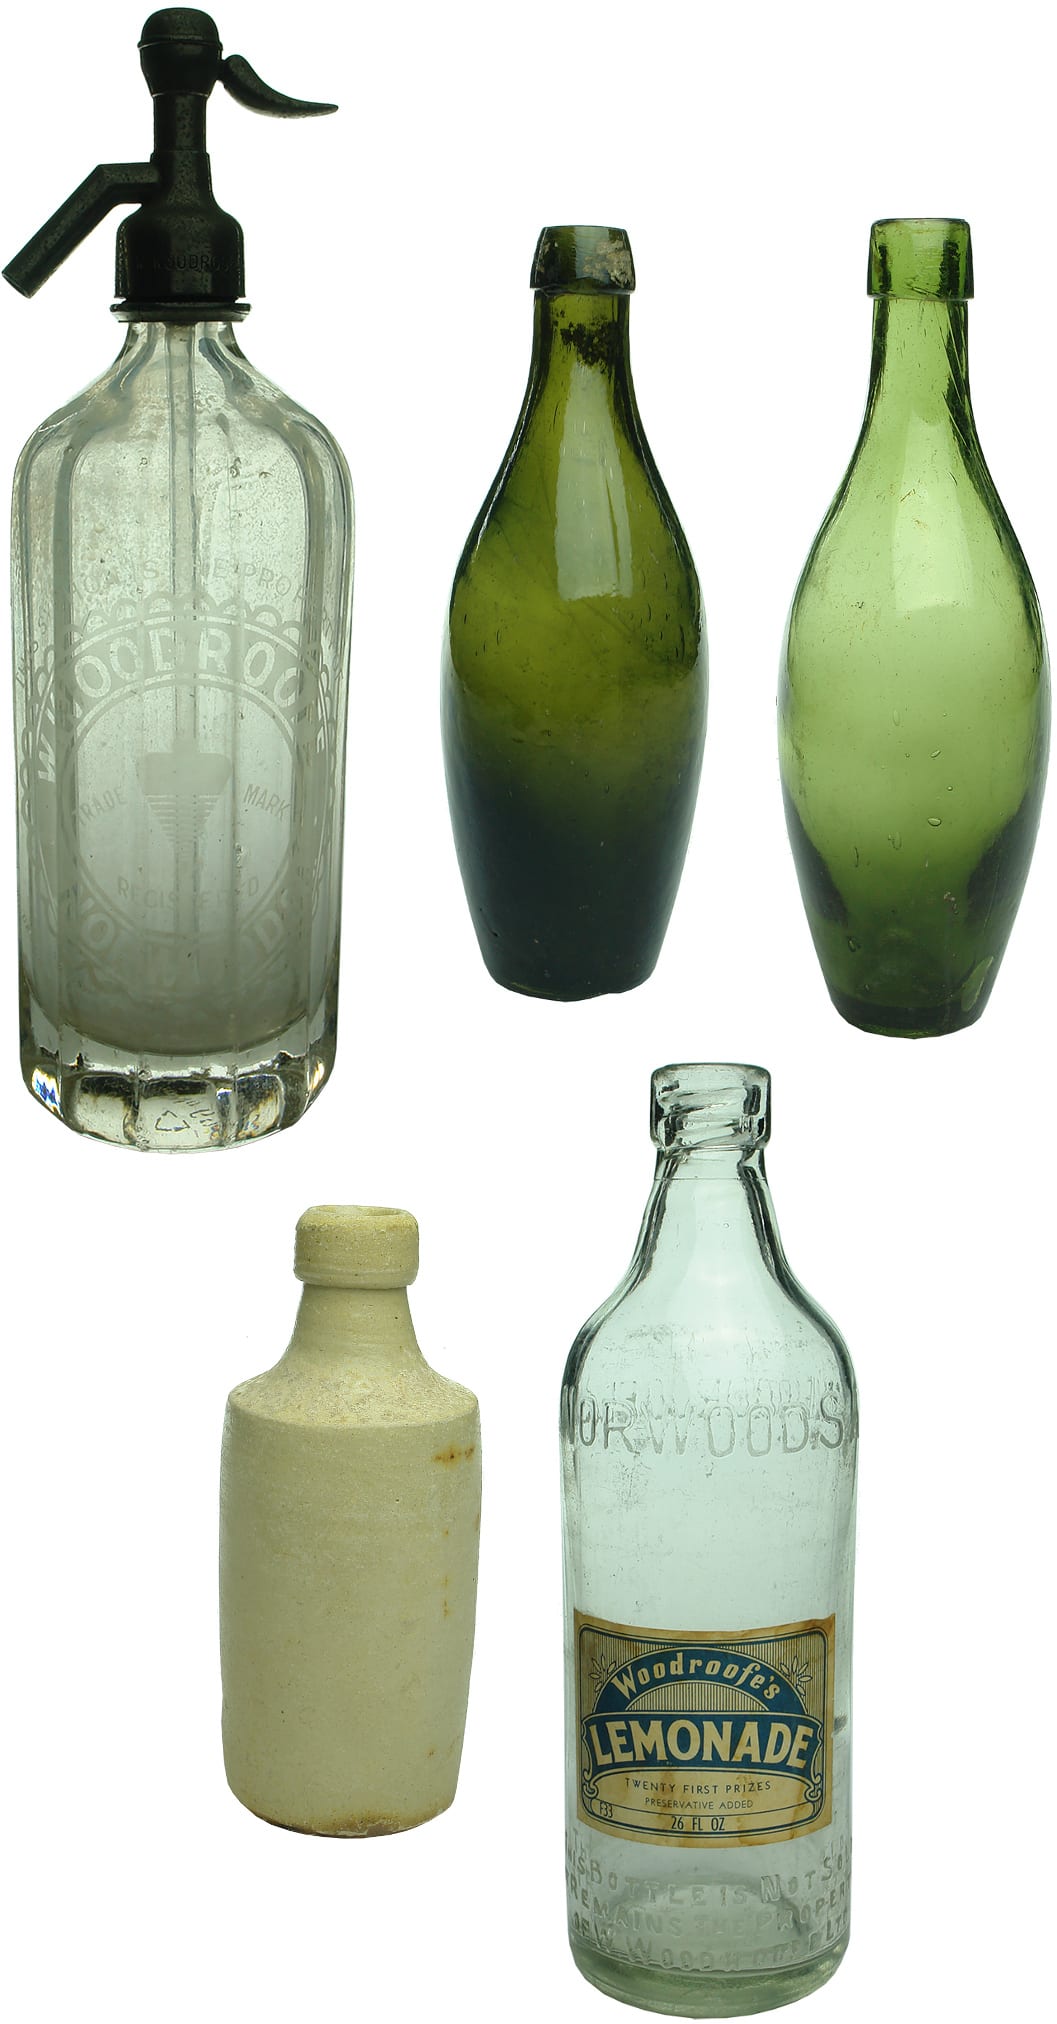 Old and Antique Bottles